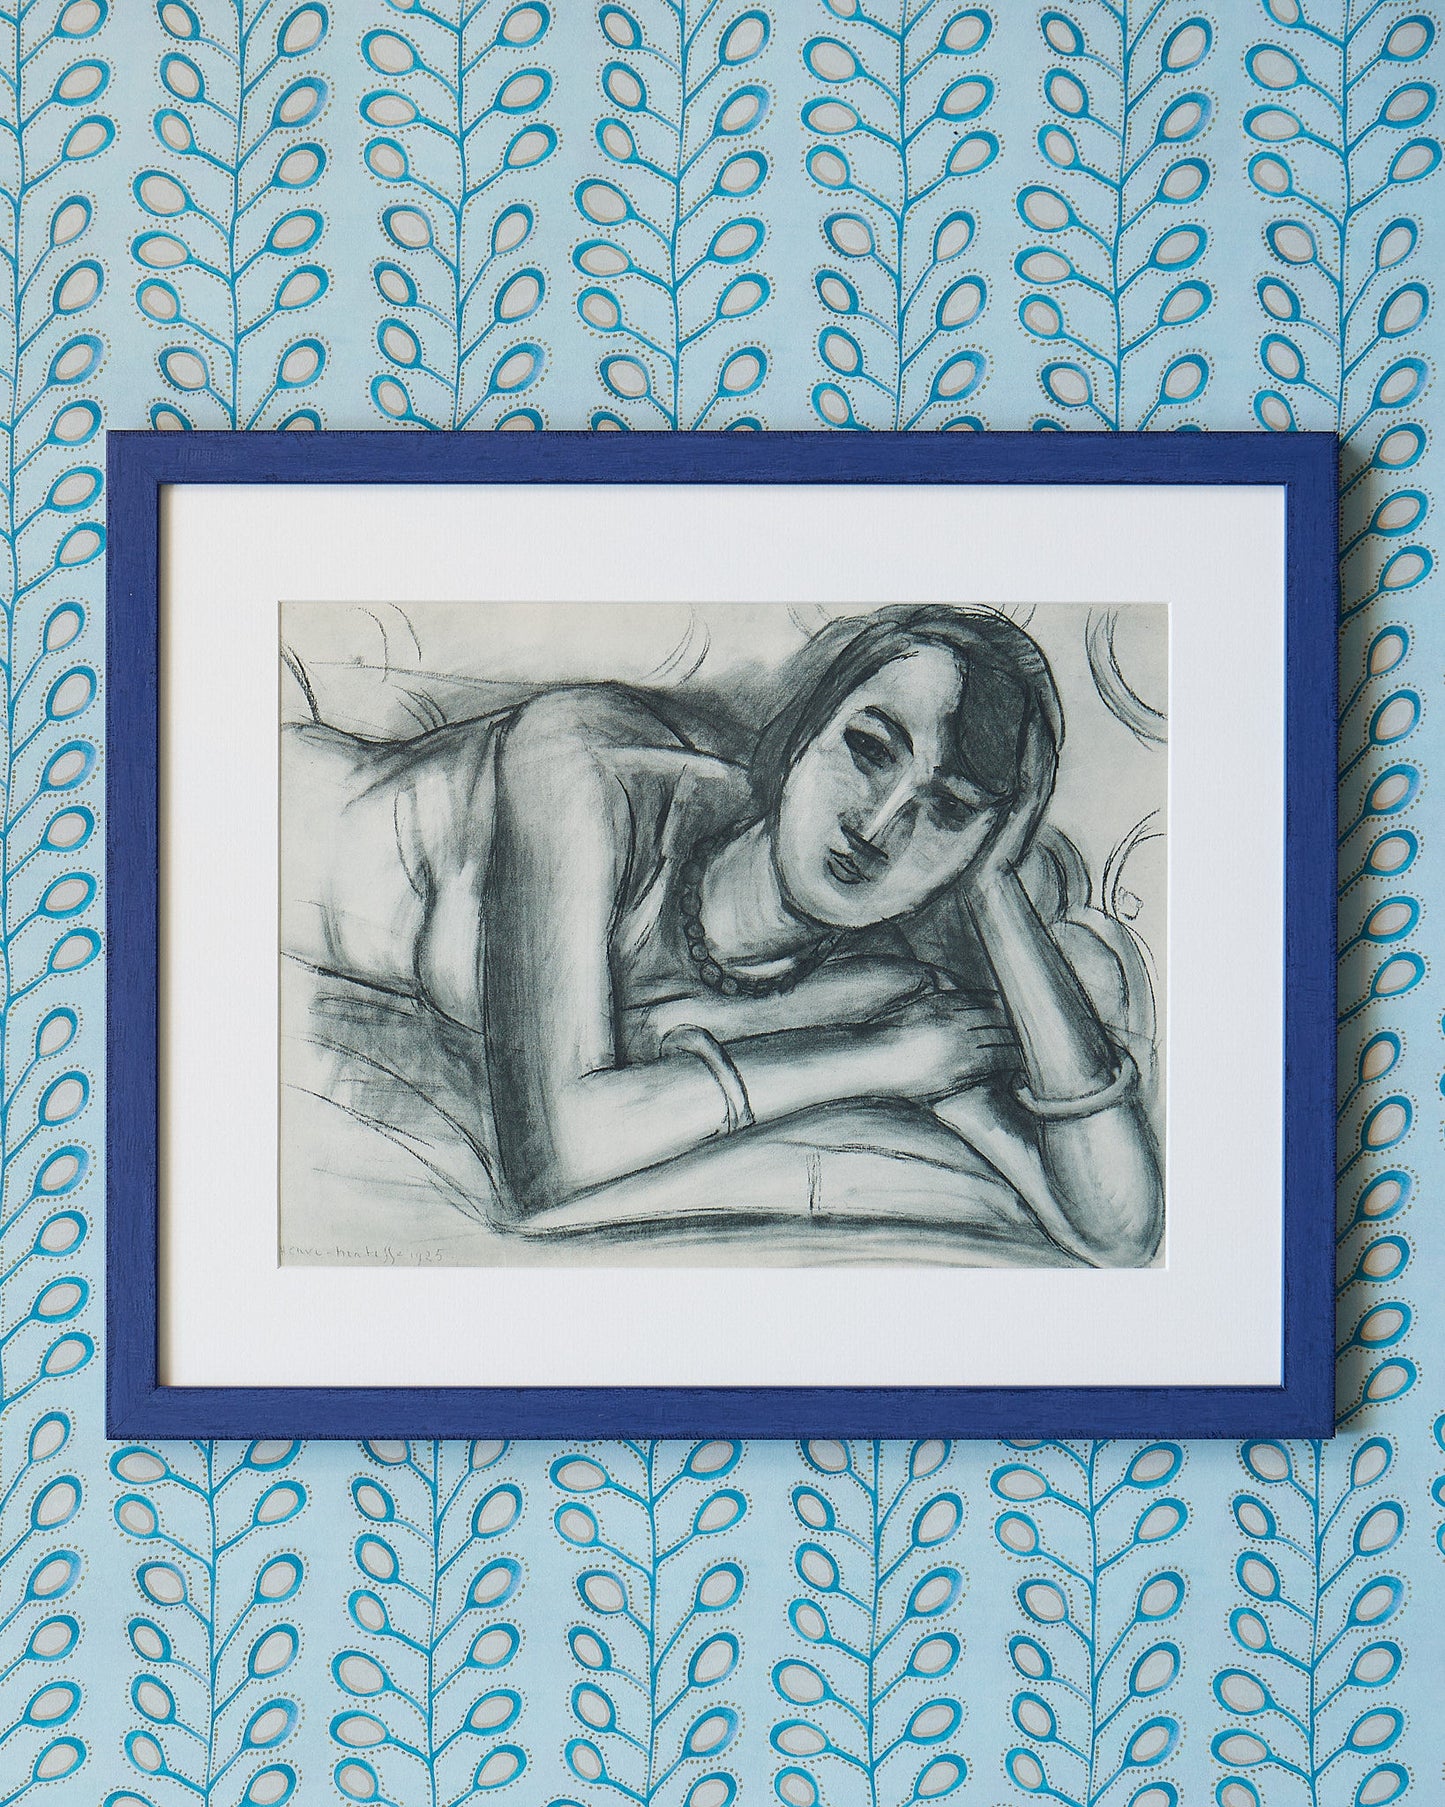 A 1950s Lithograph Print of a Reclining Woman after a Drawing by Henri Matisse